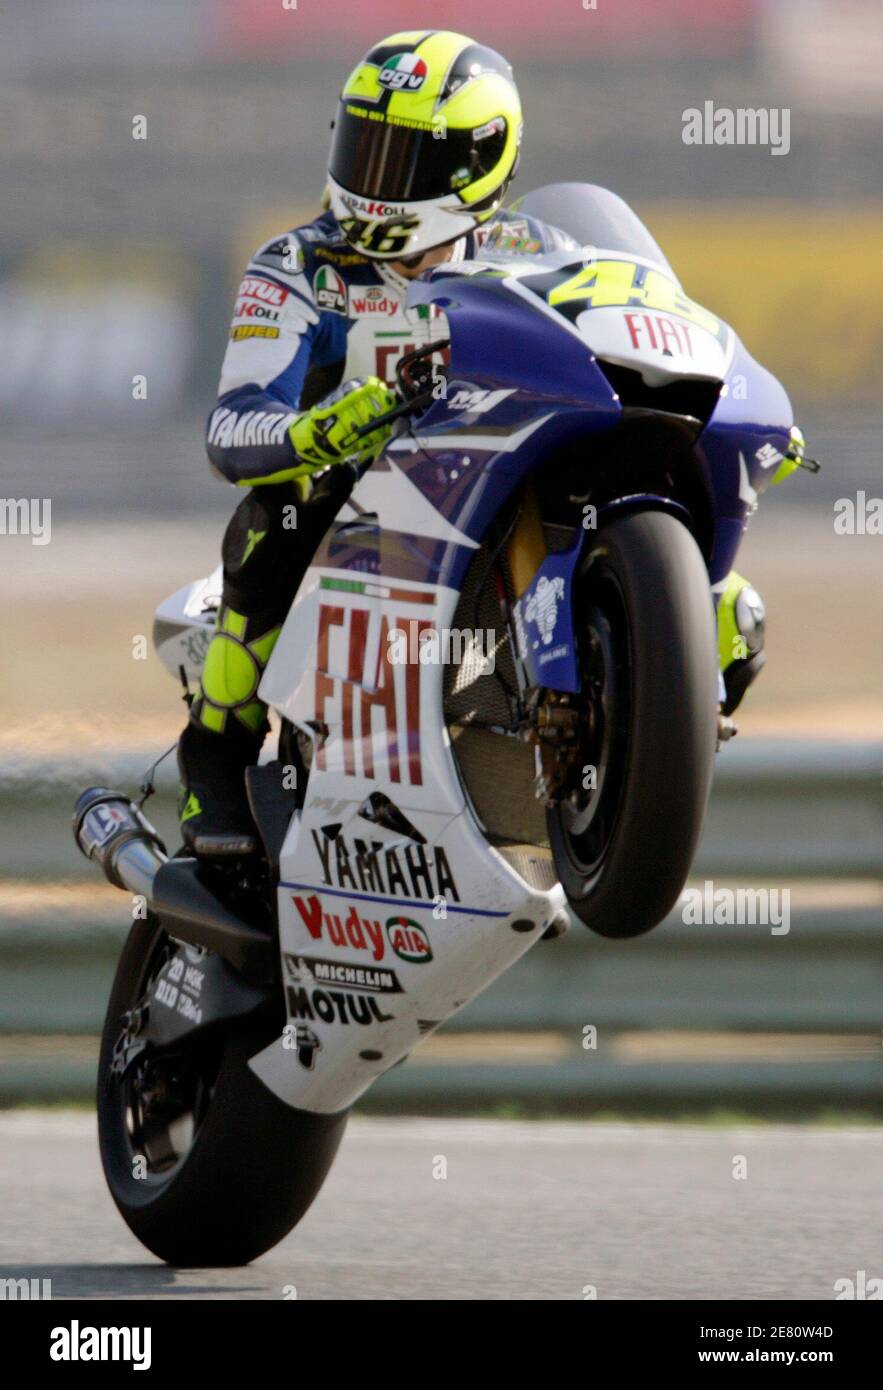 Valentino Rossi Wheelie High Resolution Stock Photography and Images - Alamy